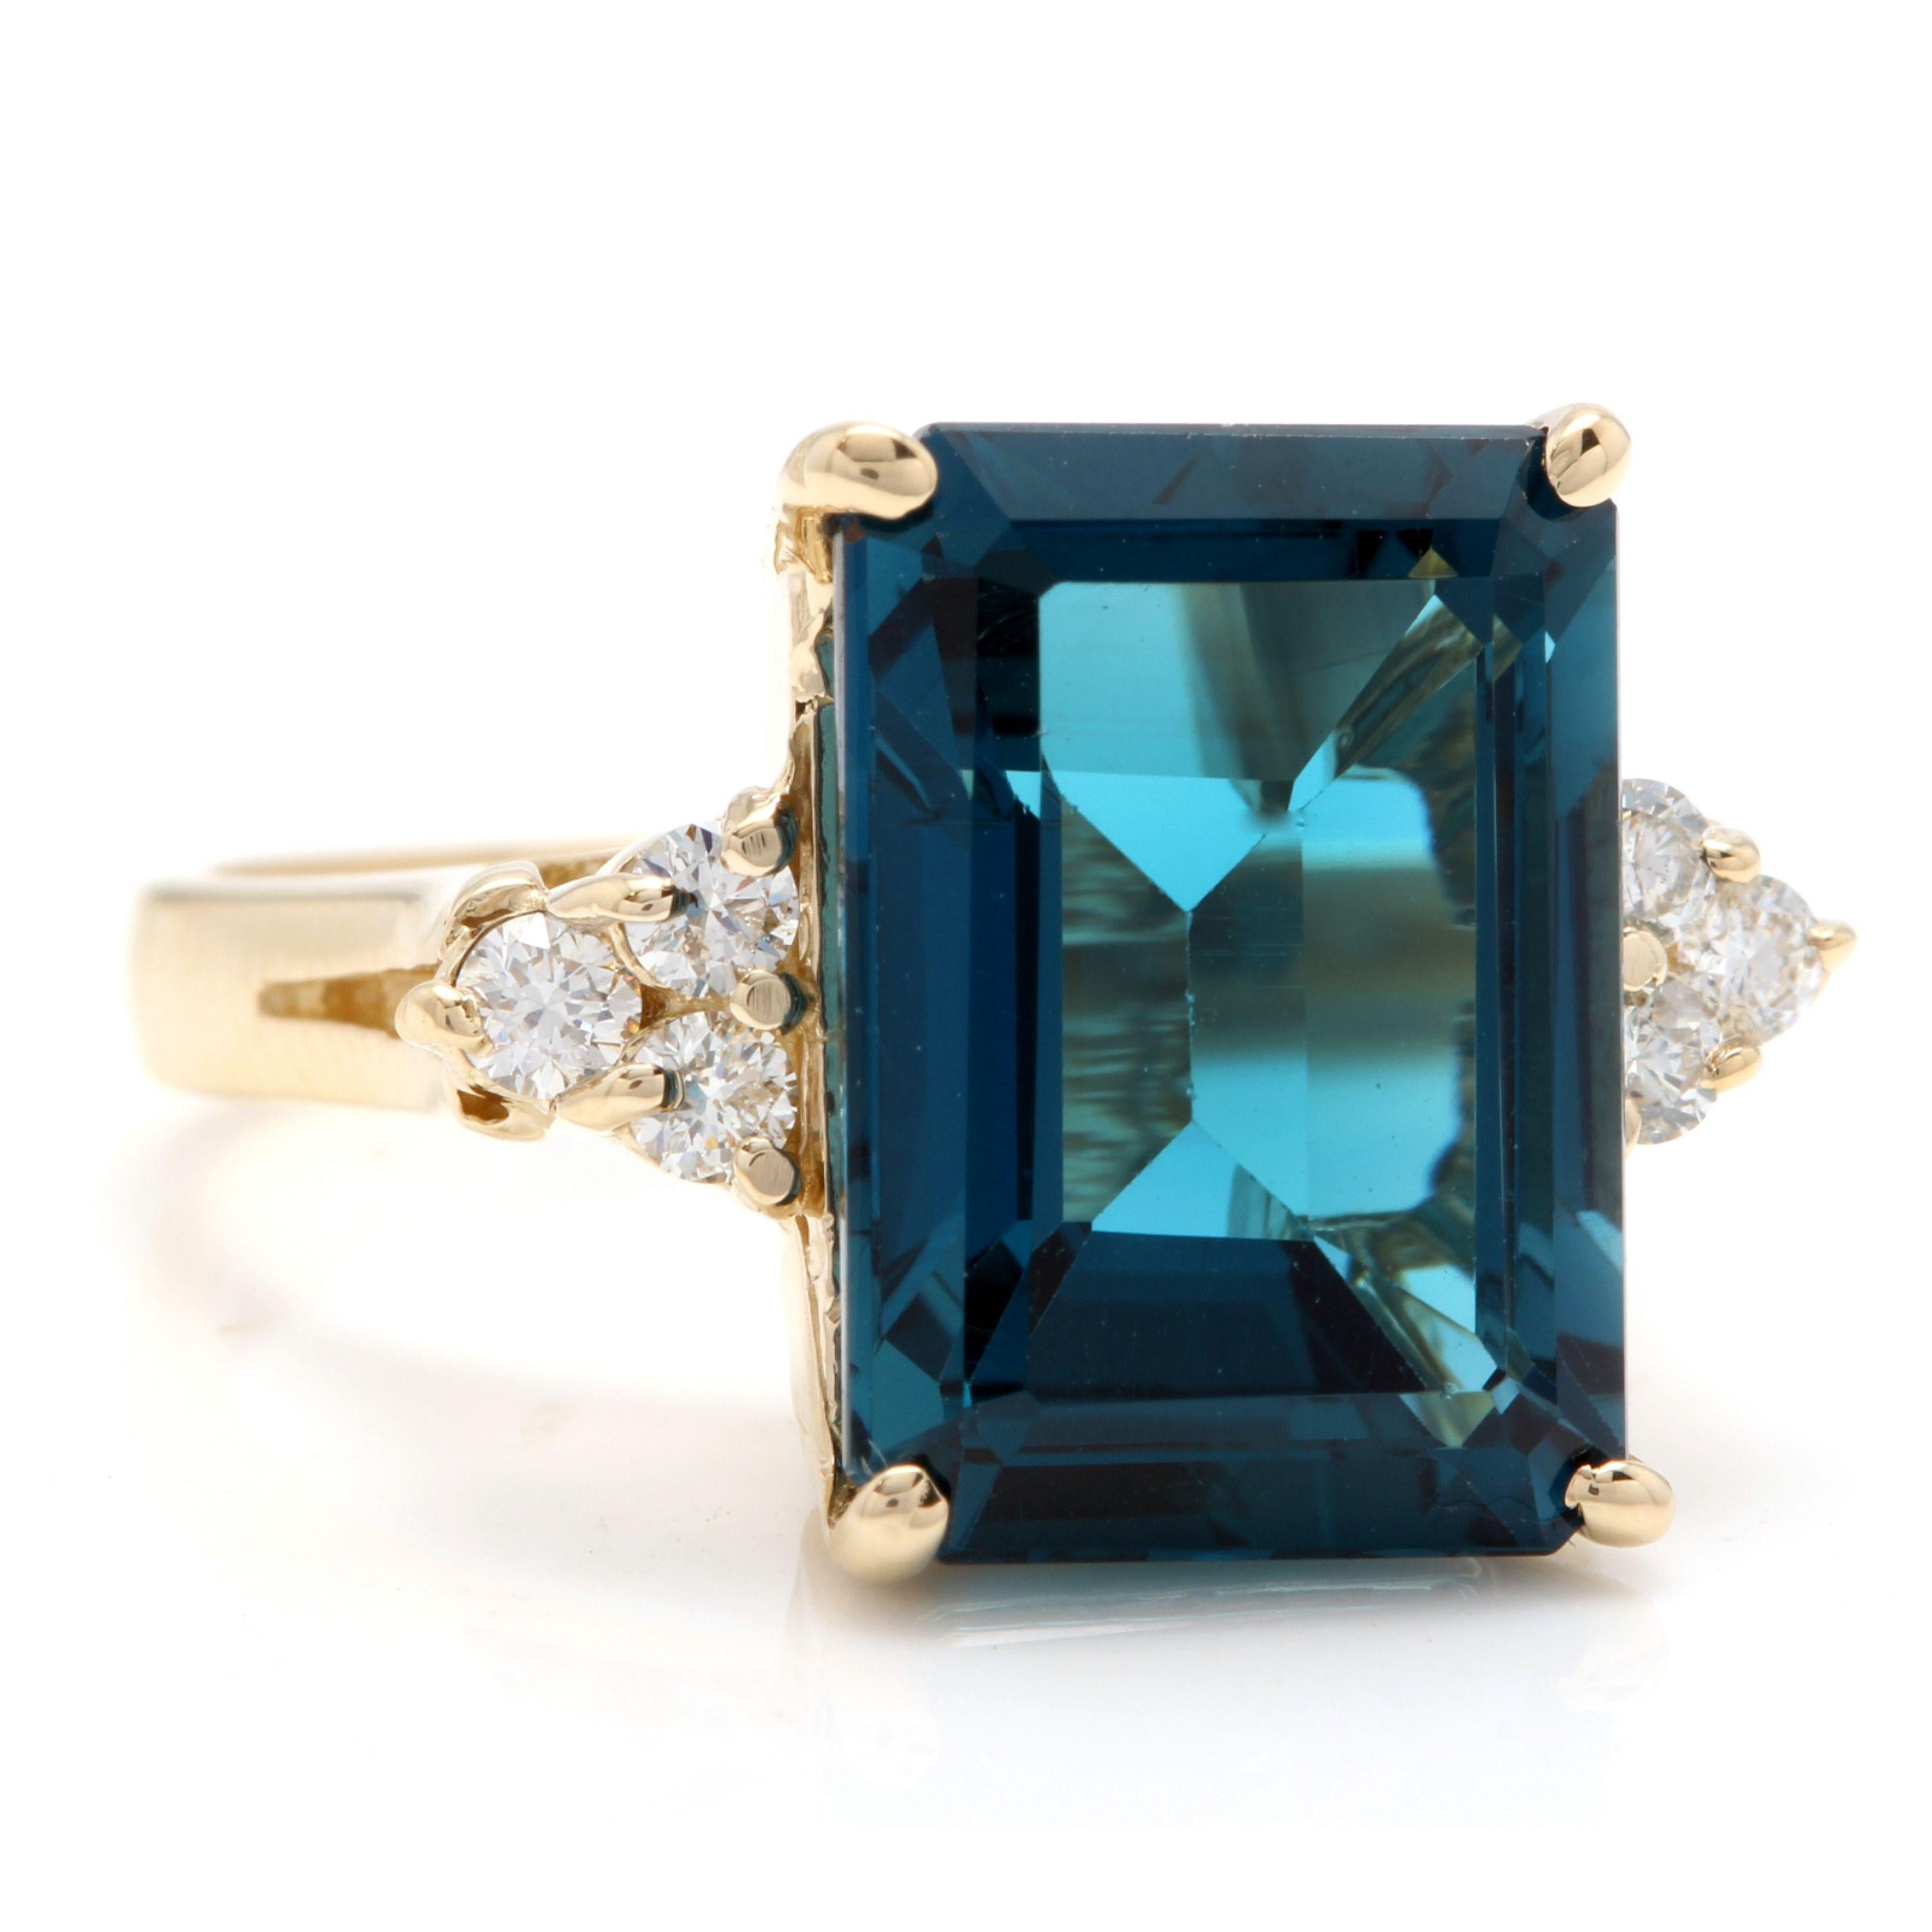 9.85 Carats Natural Impressive London Blue Topaz and Diamond 14K Yellow Gold Ring

Total Natural London Blue Topaz Weight: 9.50 Carats (VVS)

London Blue Topaz Measures: 14 x 10mm

Natural Round Diamonds Weight: .35 Carats (color G-H / Clarity